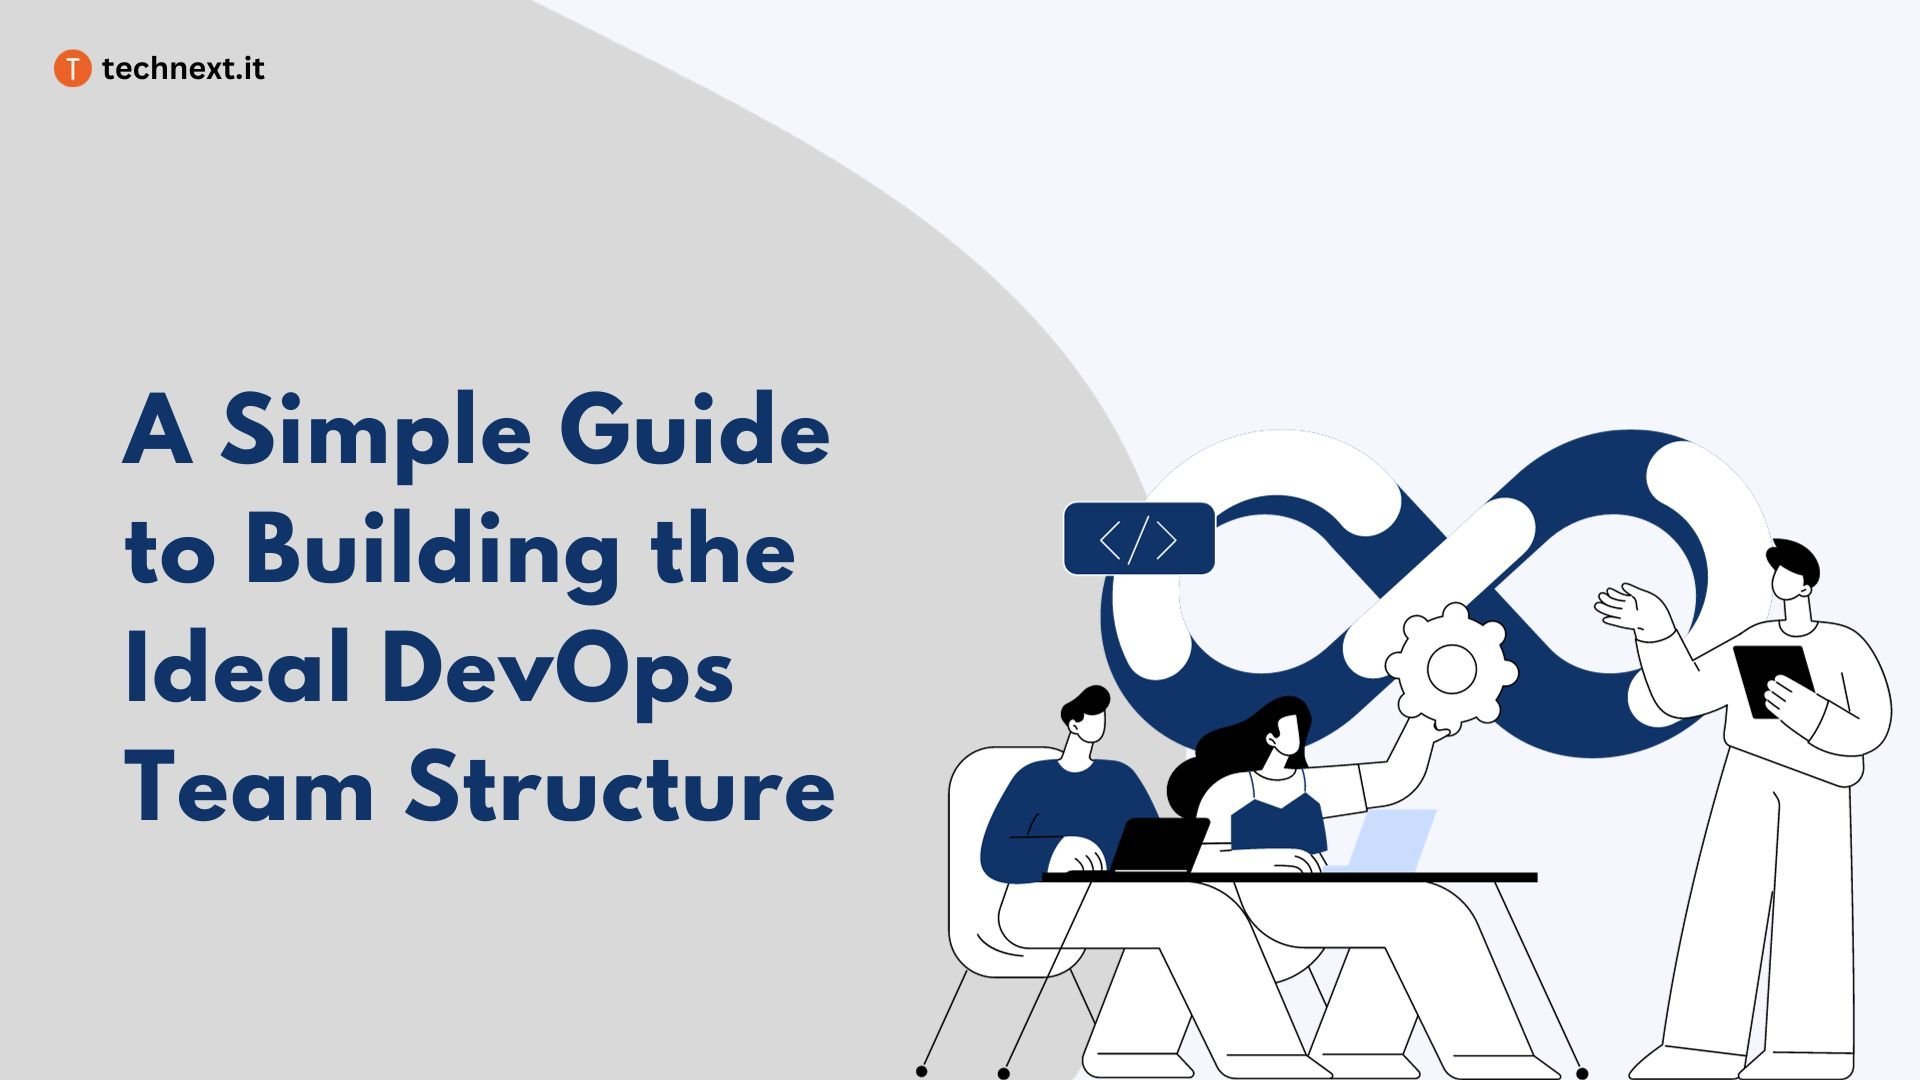 A Simple Guide to Building the Ideal DevOps Team Structure